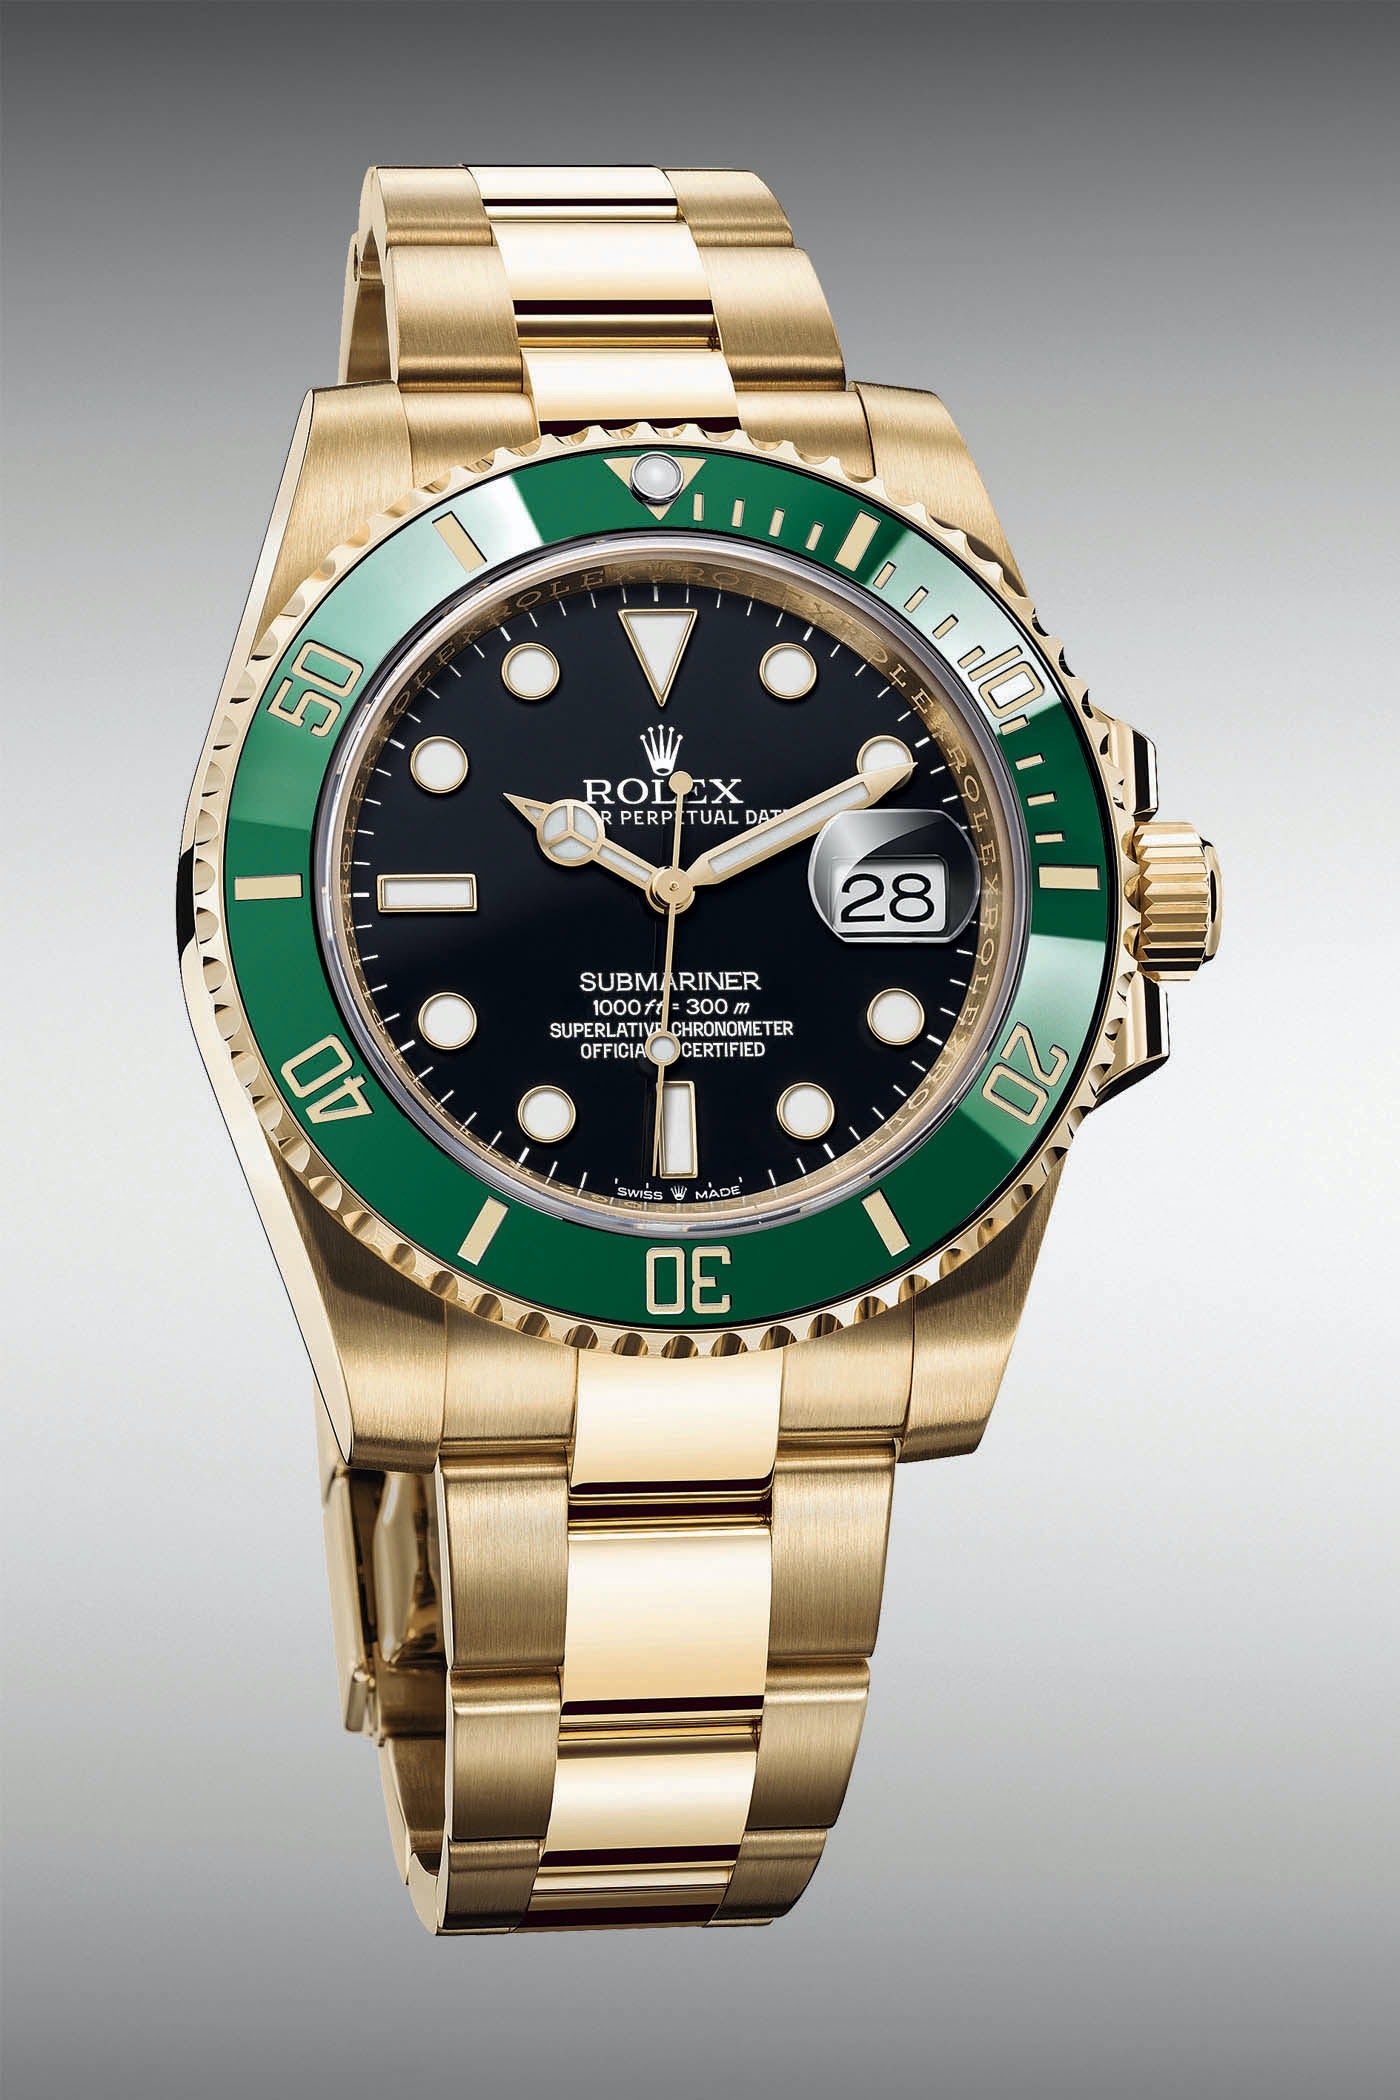 What will the 2020 Rolex novelties look like?